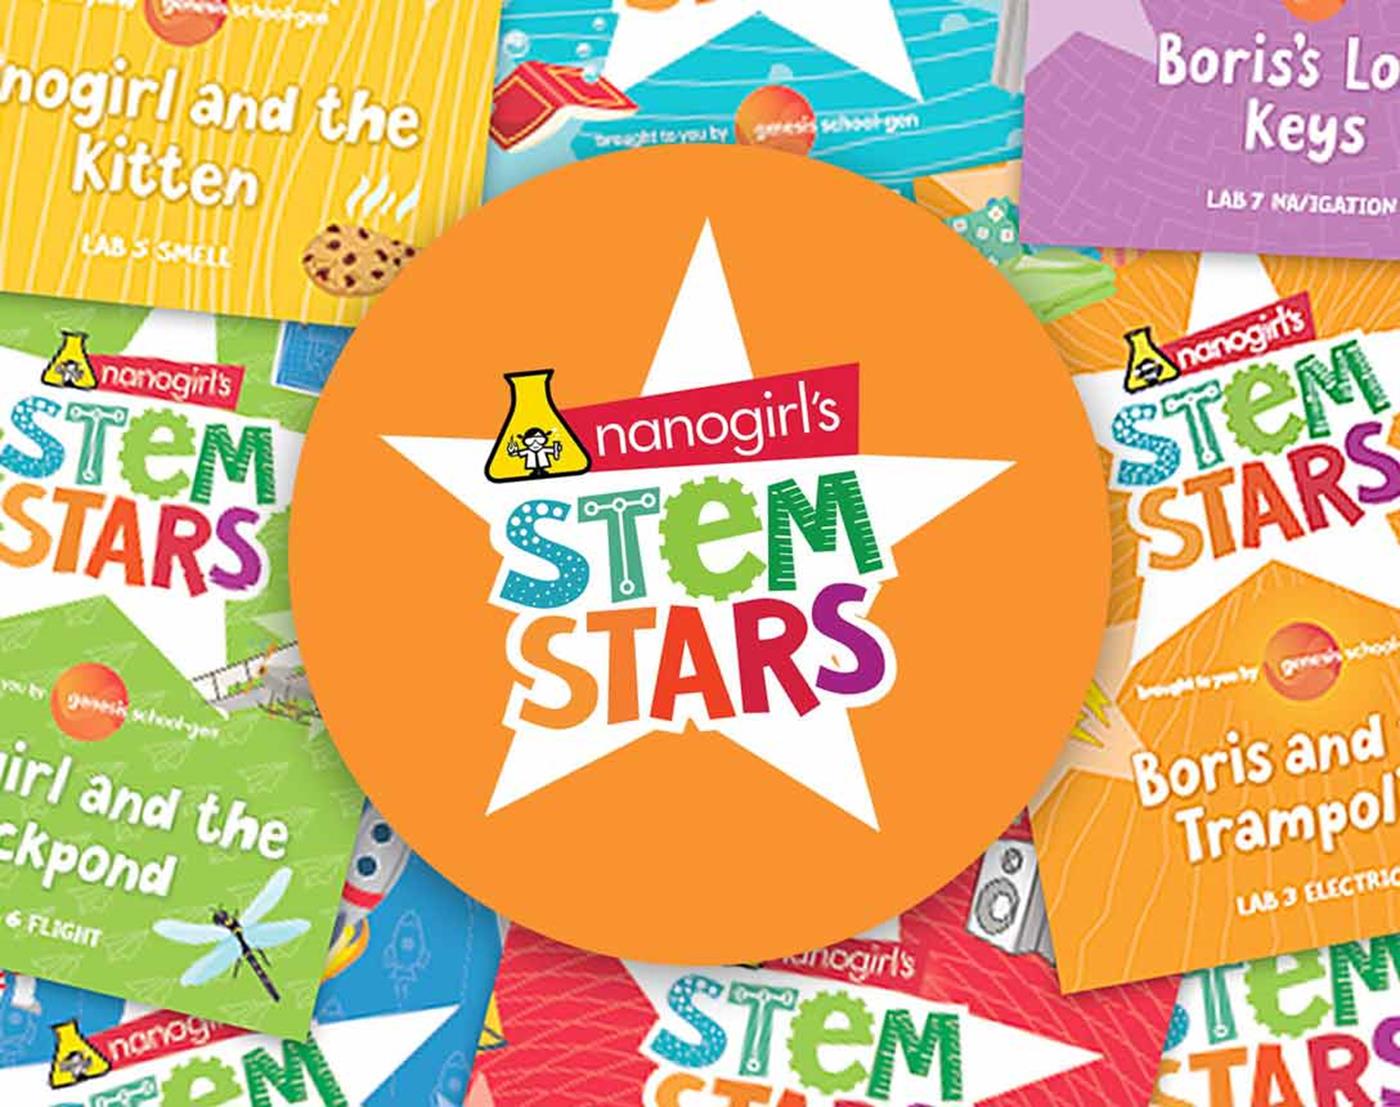 STEMSTARS activity covers